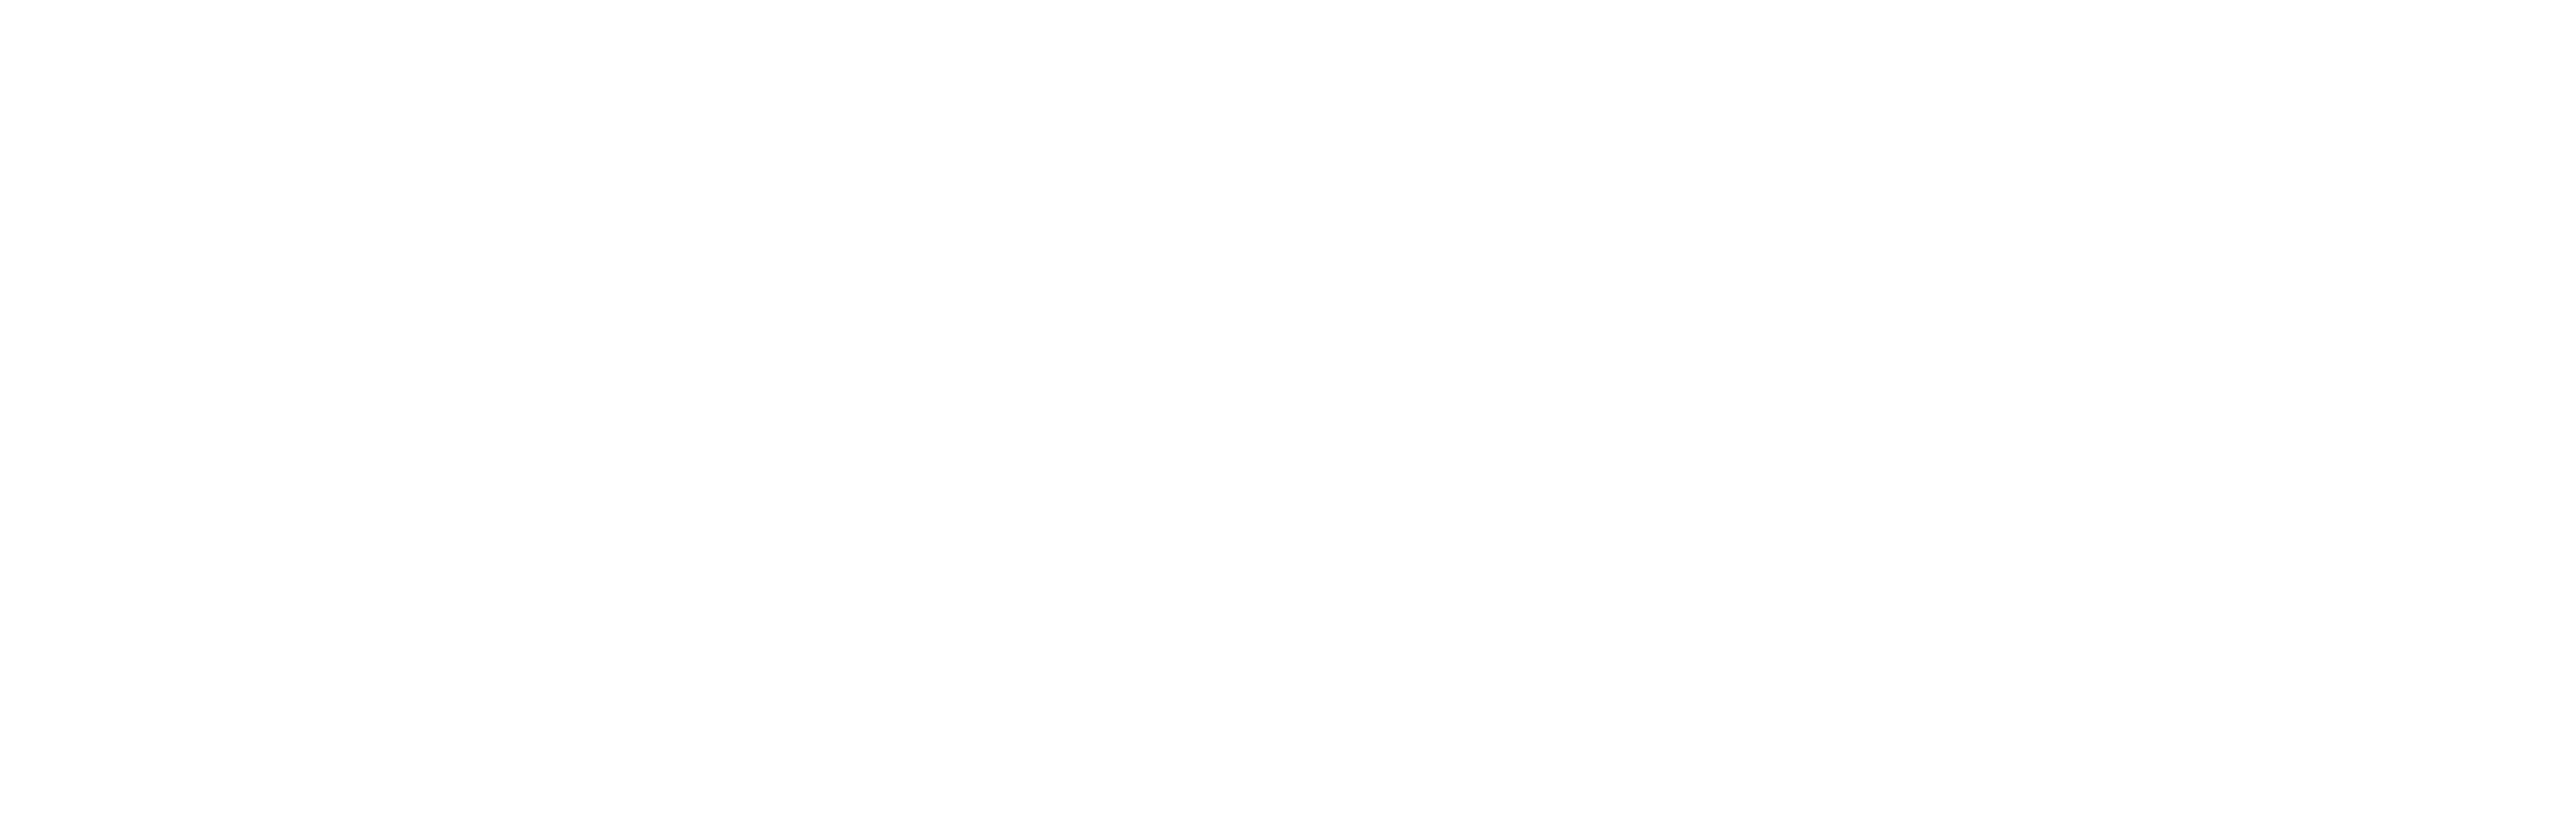 Del Rey Packing Company Logo White Transparent